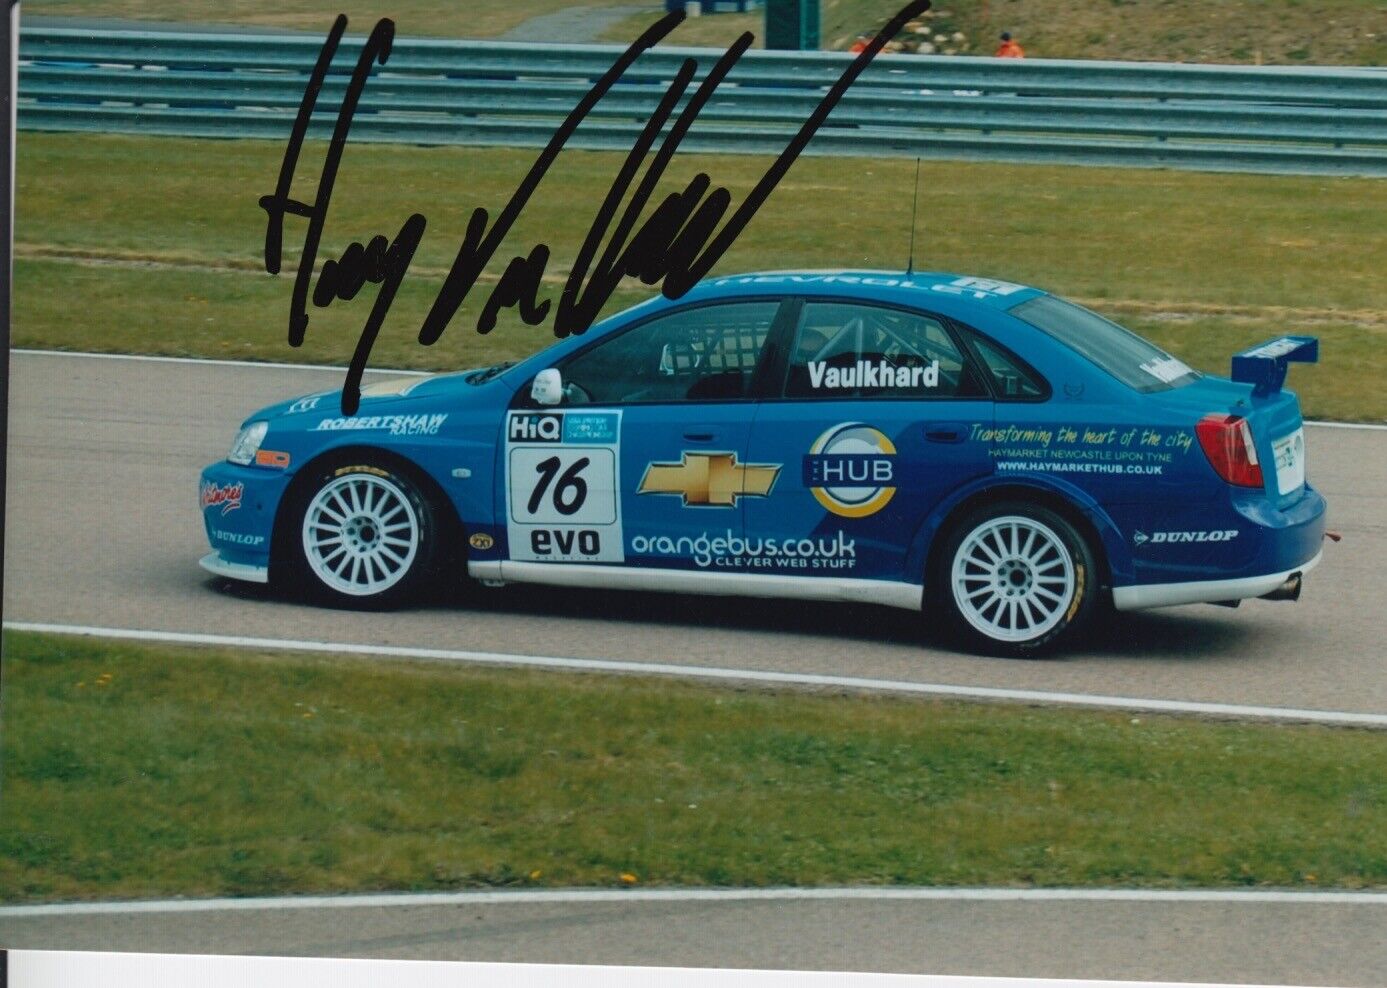 Harry Vaulkhard Hand Signed 7x5 Photo Poster painting - Touring Cars Autograph 1.